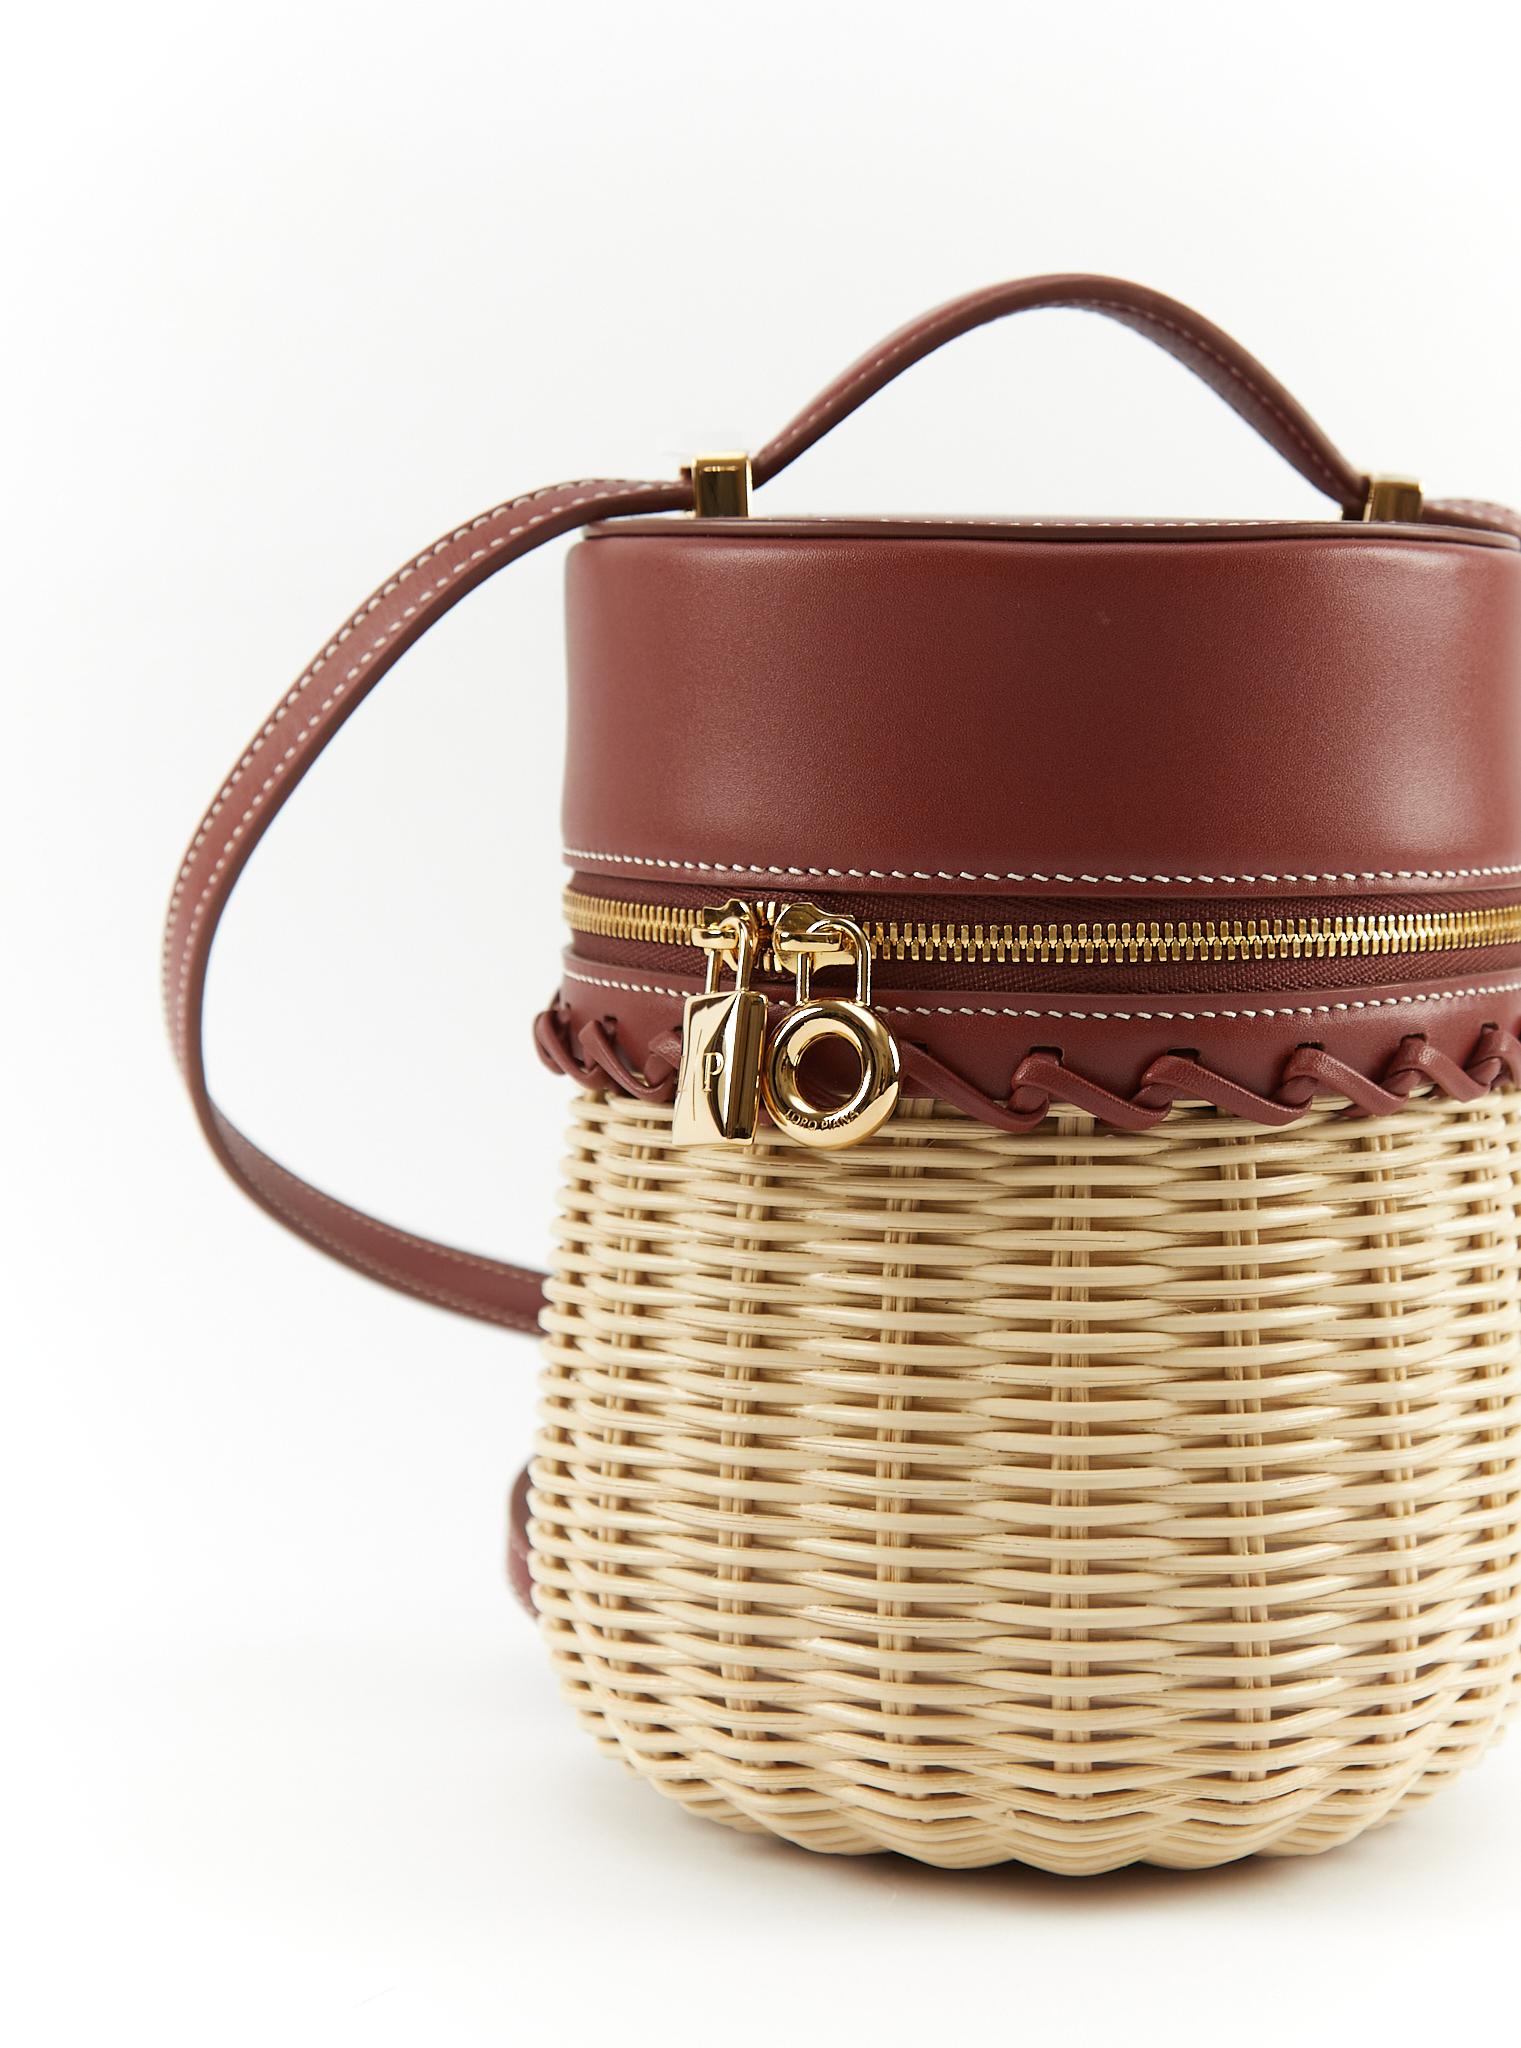 LORO PIANA Wicker Bamboo Bucket Bag In New Condition For Sale In London, GB